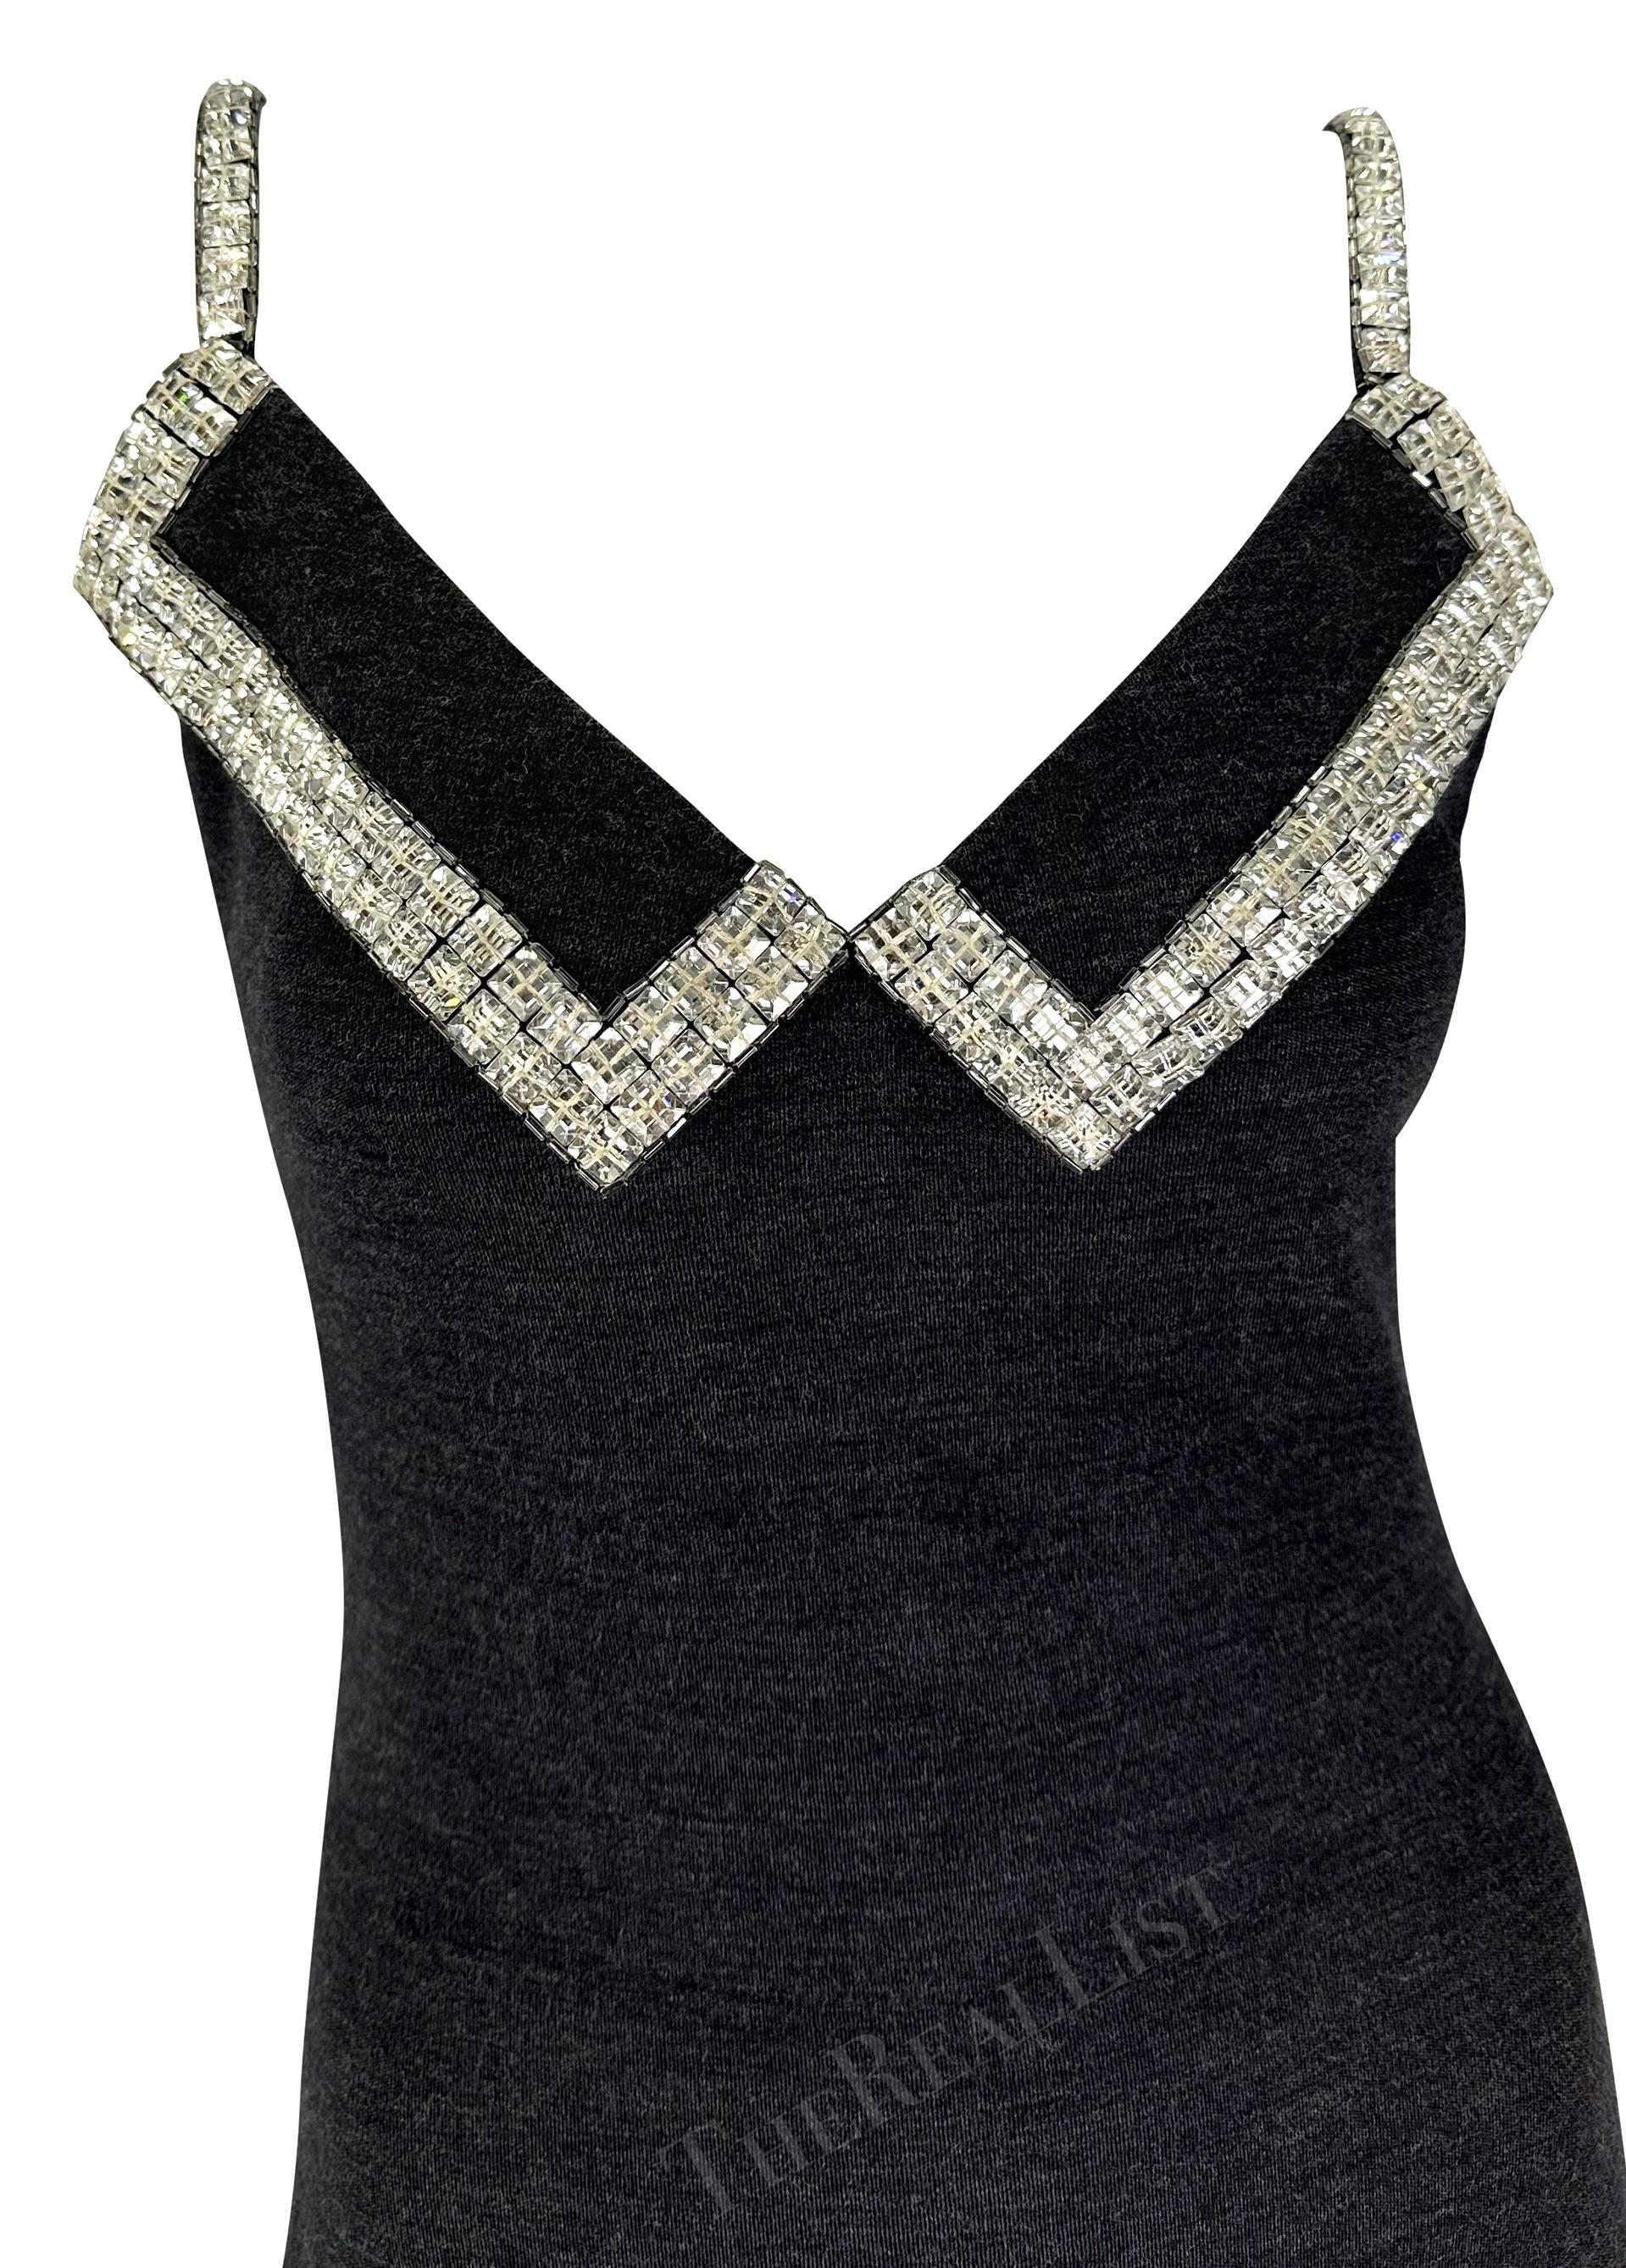 Presenting a chic heather grey James Galanos gown. From the late 1980s, this classicly sexy knit dress features a v-neckline, fold over detail at the bust, and a low exposed back. The dress is made complete with square rhinestone accents at the bust